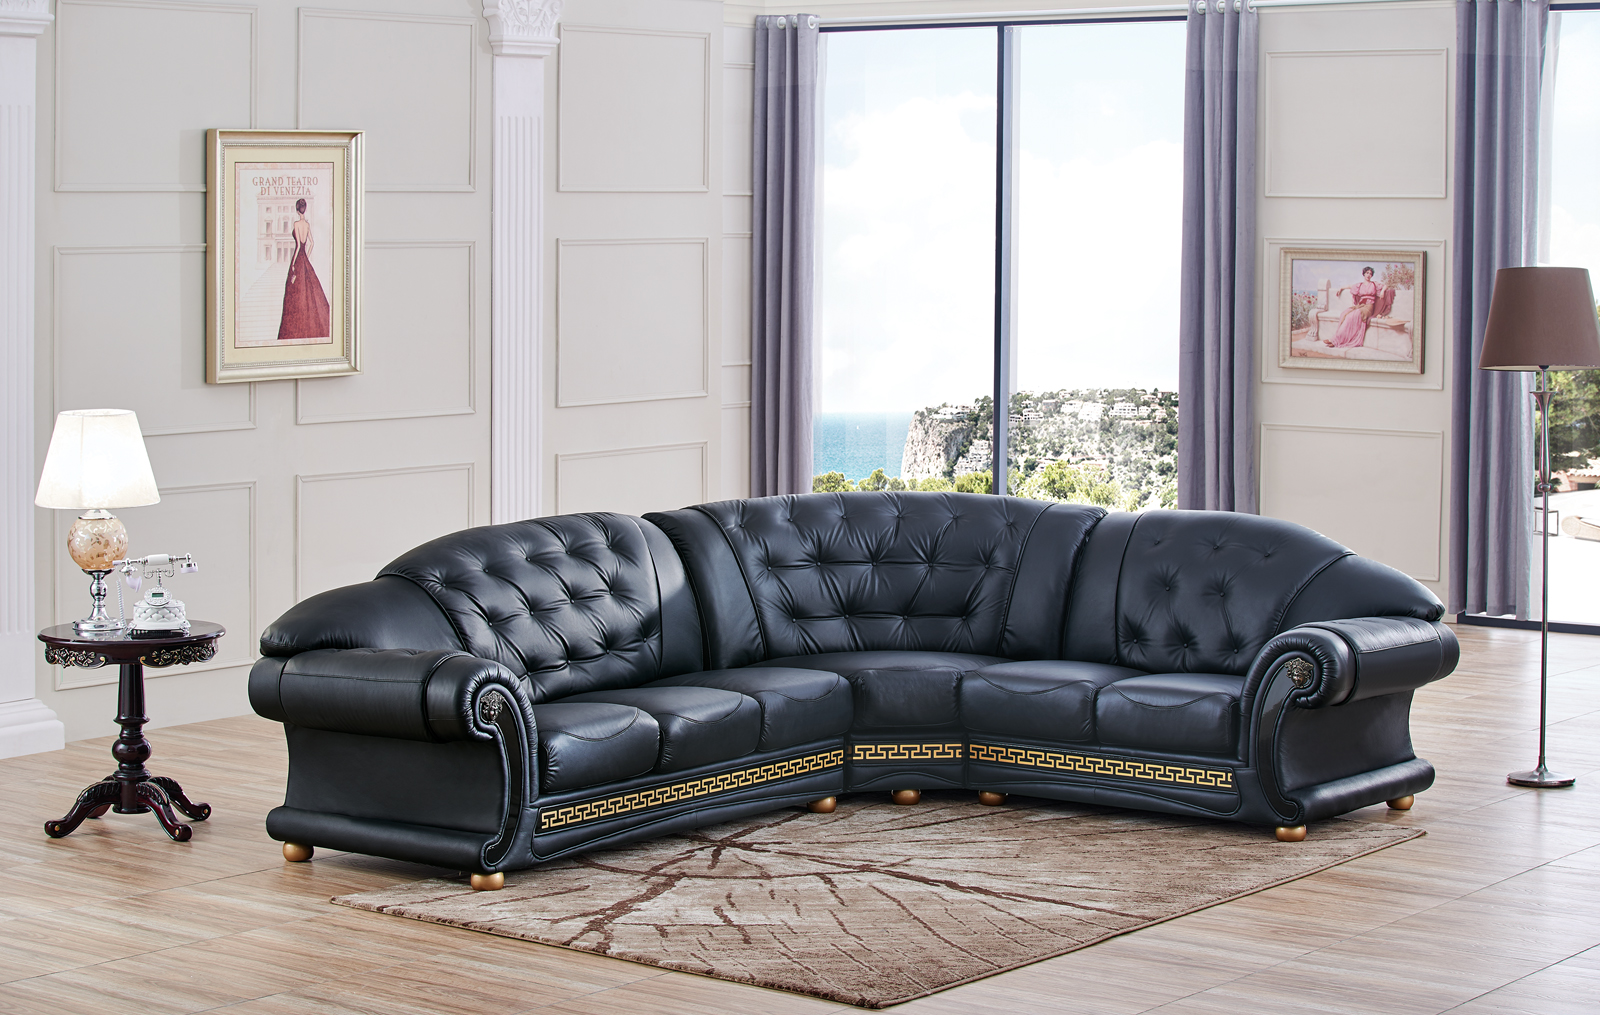 leather sectional living room furniture